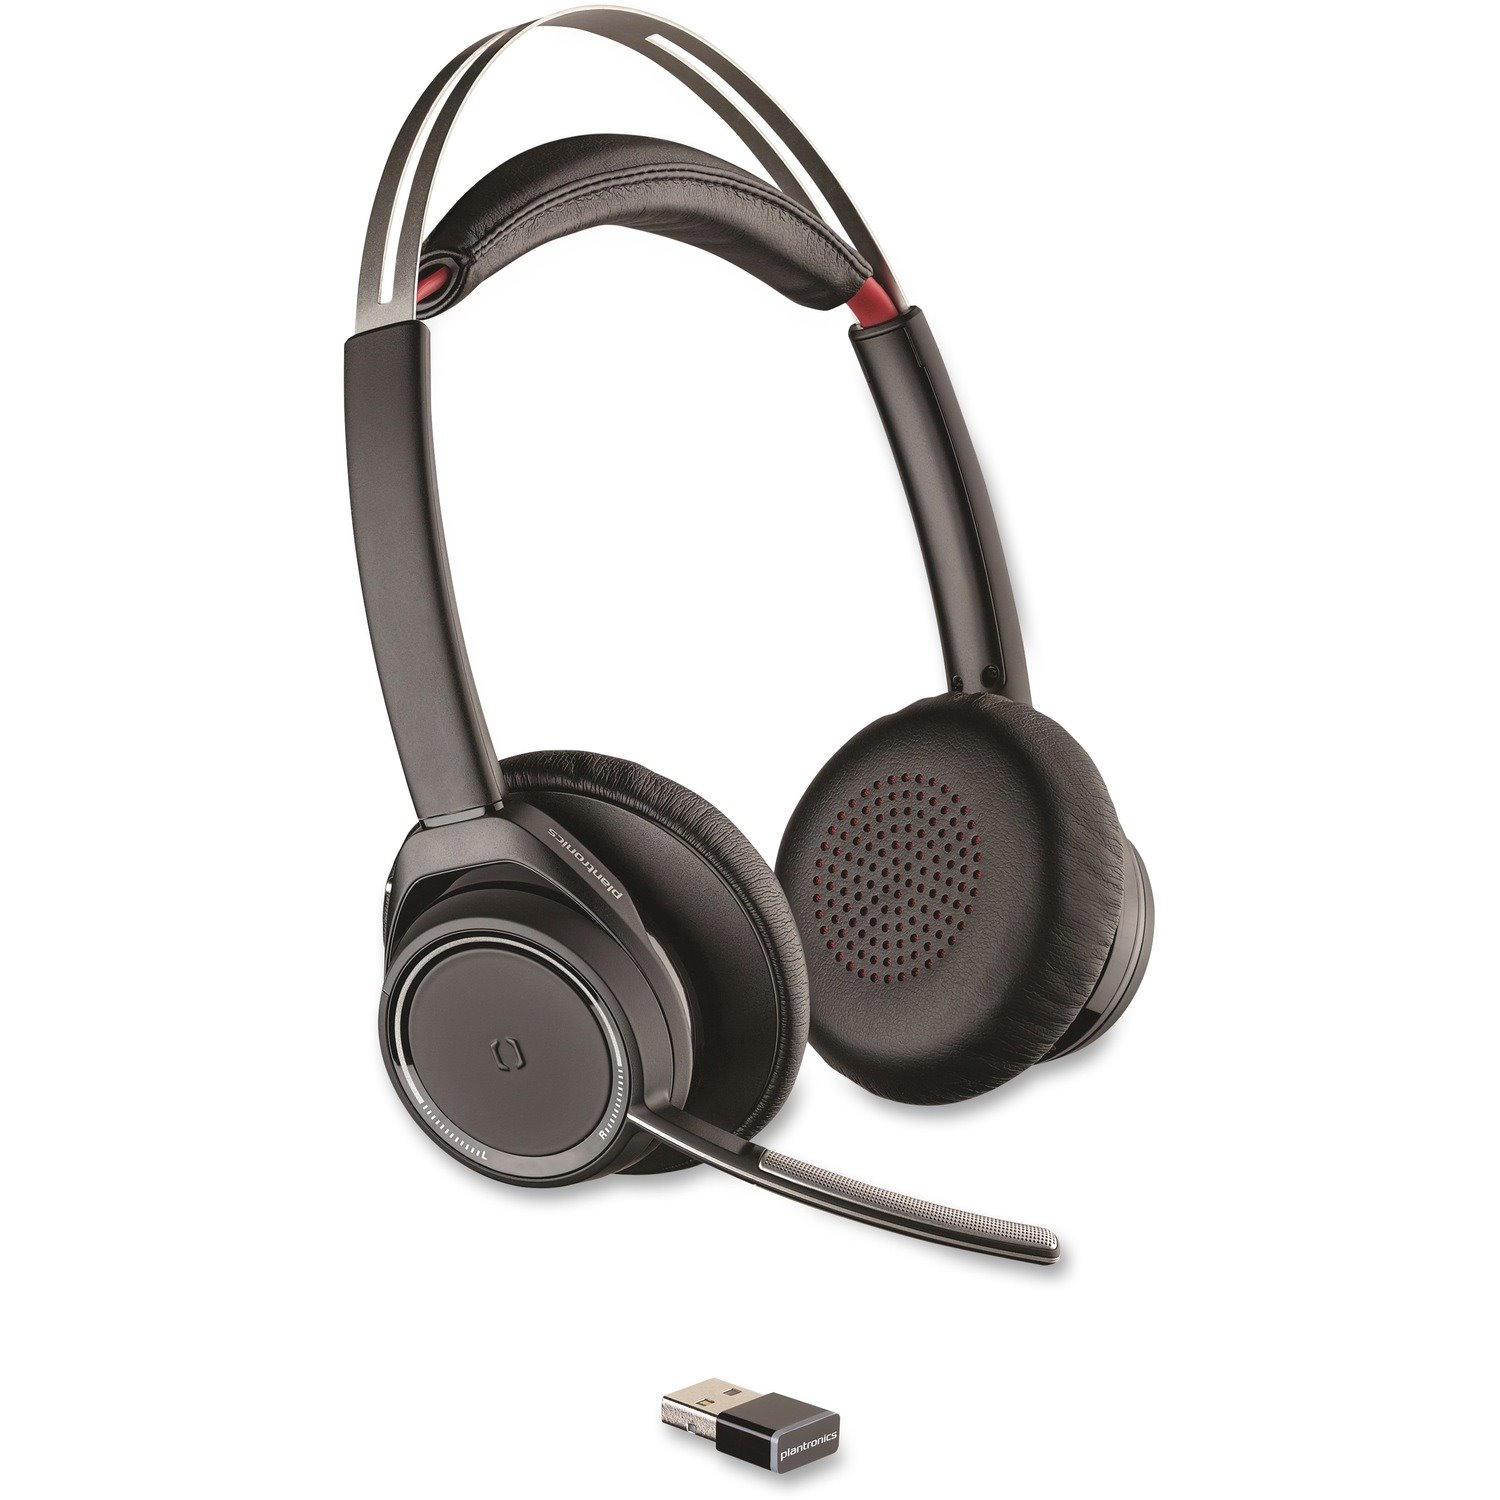 Plantronics Voyager Focus UC B825 Wireless Over-the-head Stereo Headset